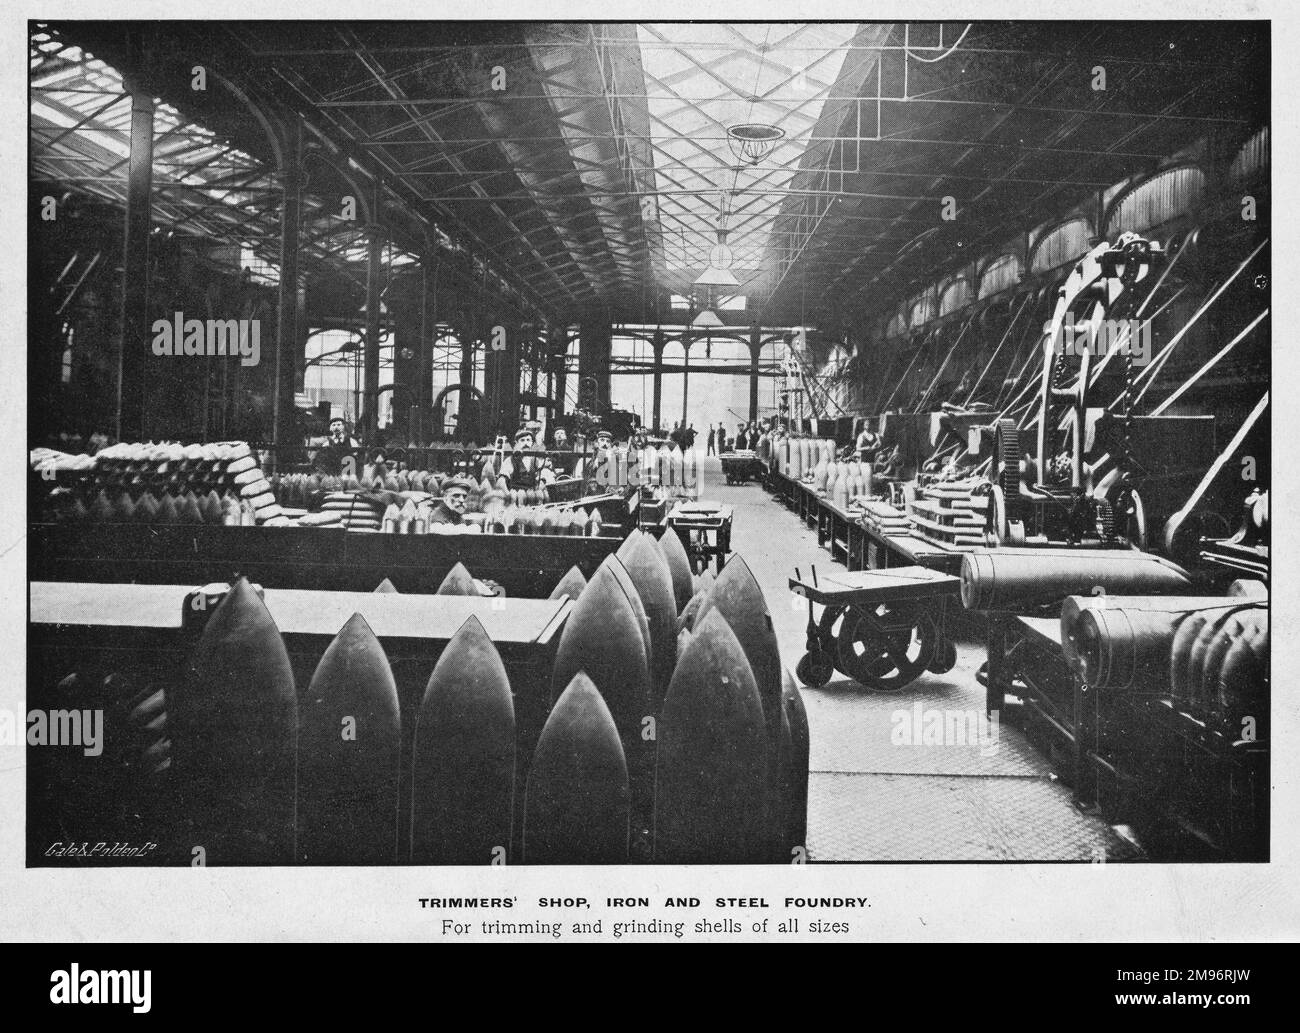 View of the trimmers' shop in the iron and steel foundry,Woolwich Arsenal, south east London, for the trimming and grinding of shells of all sizes. Stock Photo